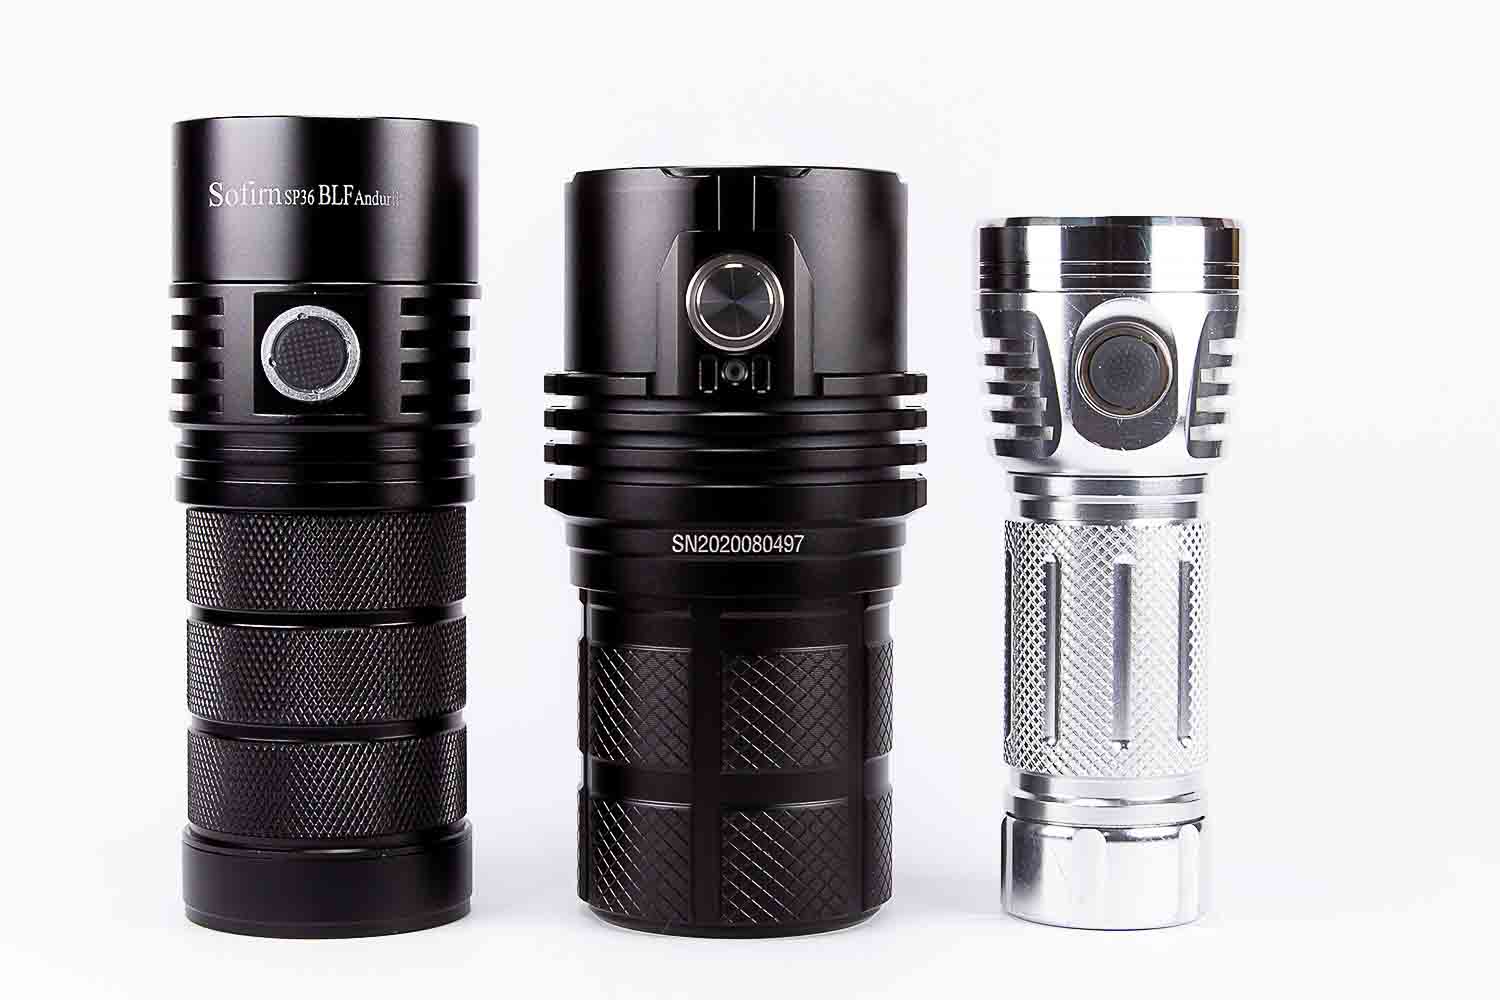 Imalent MS06 review | 25,000 Lumen flashlight (with 10% discount 